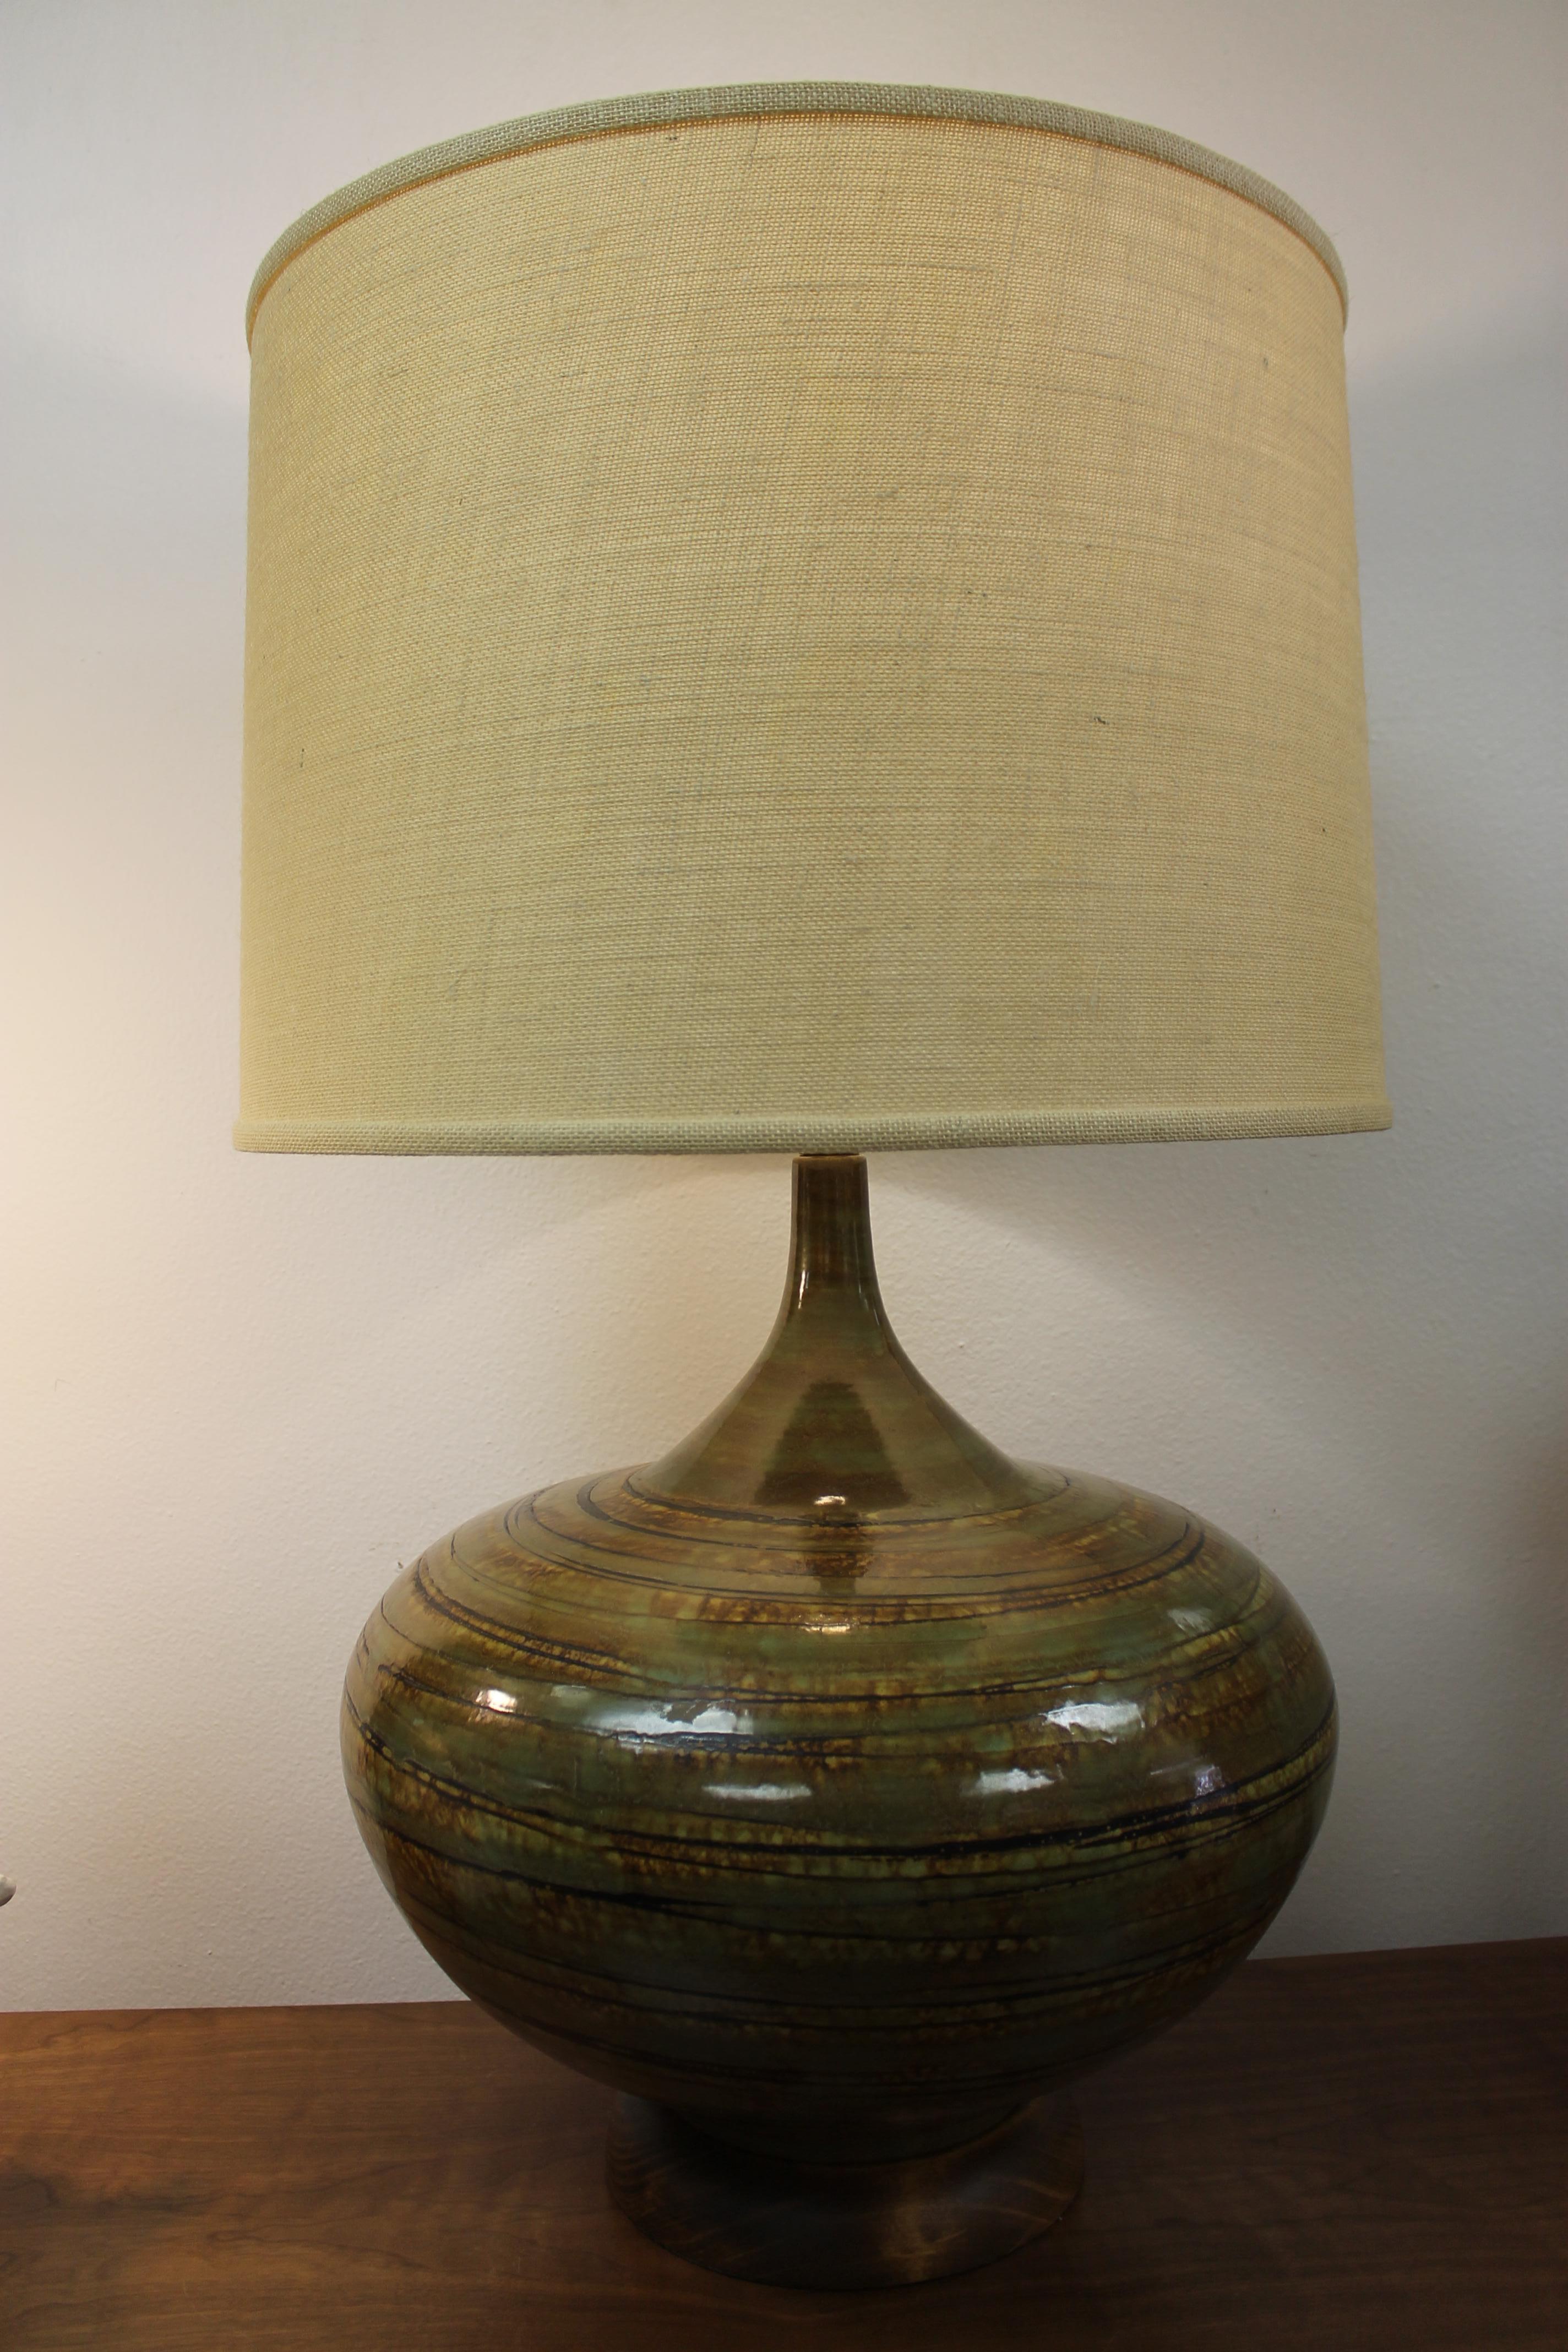 Ceramic lamp consisting of brown, black and green swirls throughout. Lamp is 20